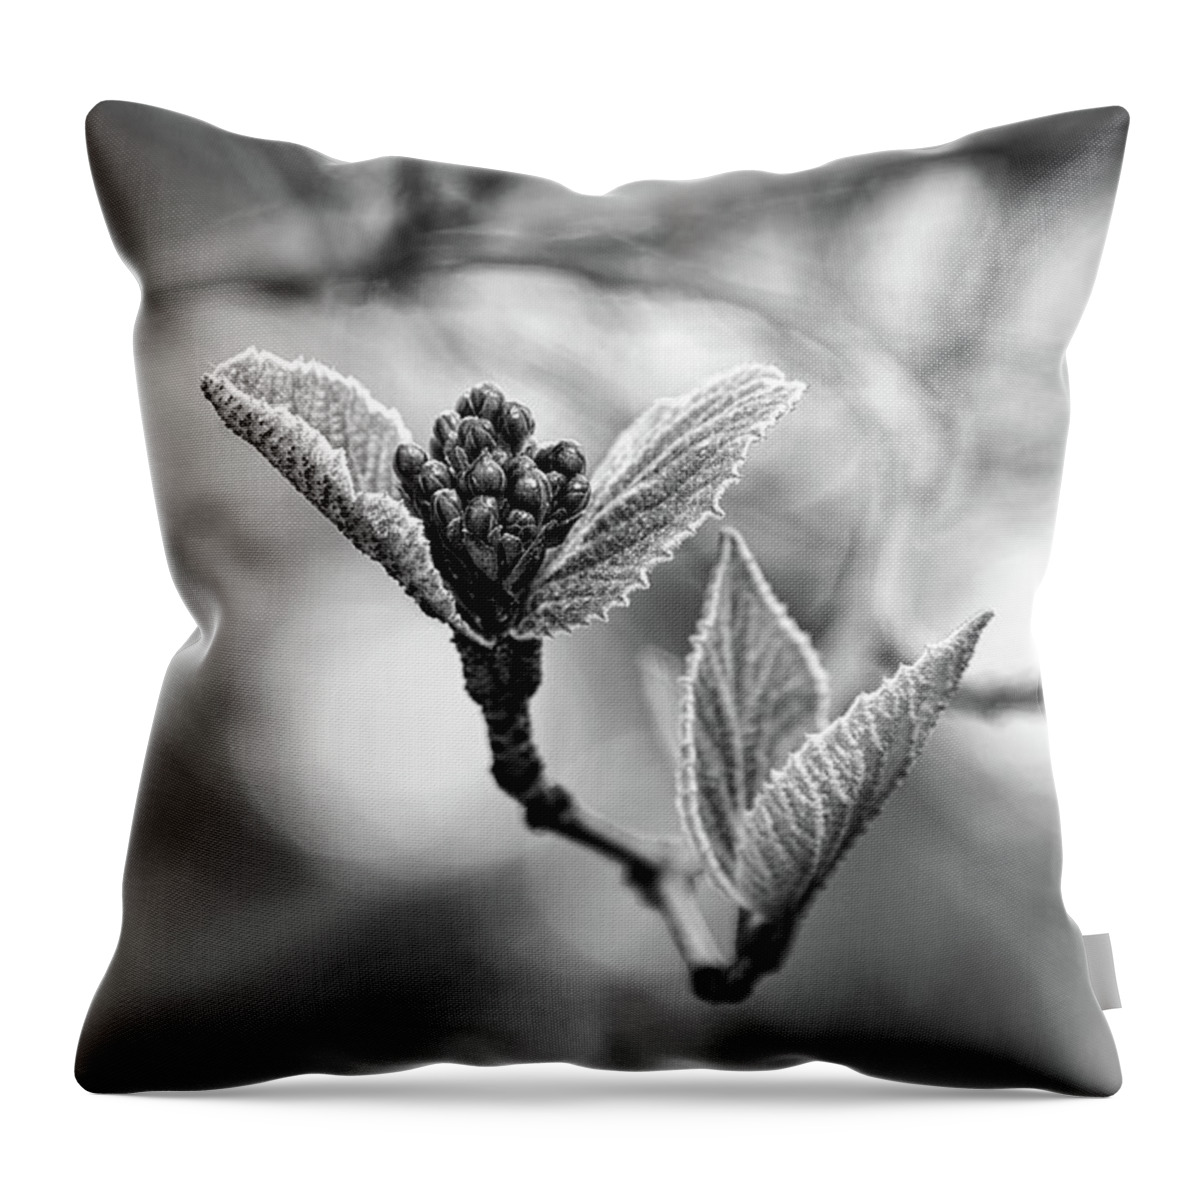 Black And White Throw Pillow featuring the photograph Spring In The Branches Black And White by Sharon McConnell